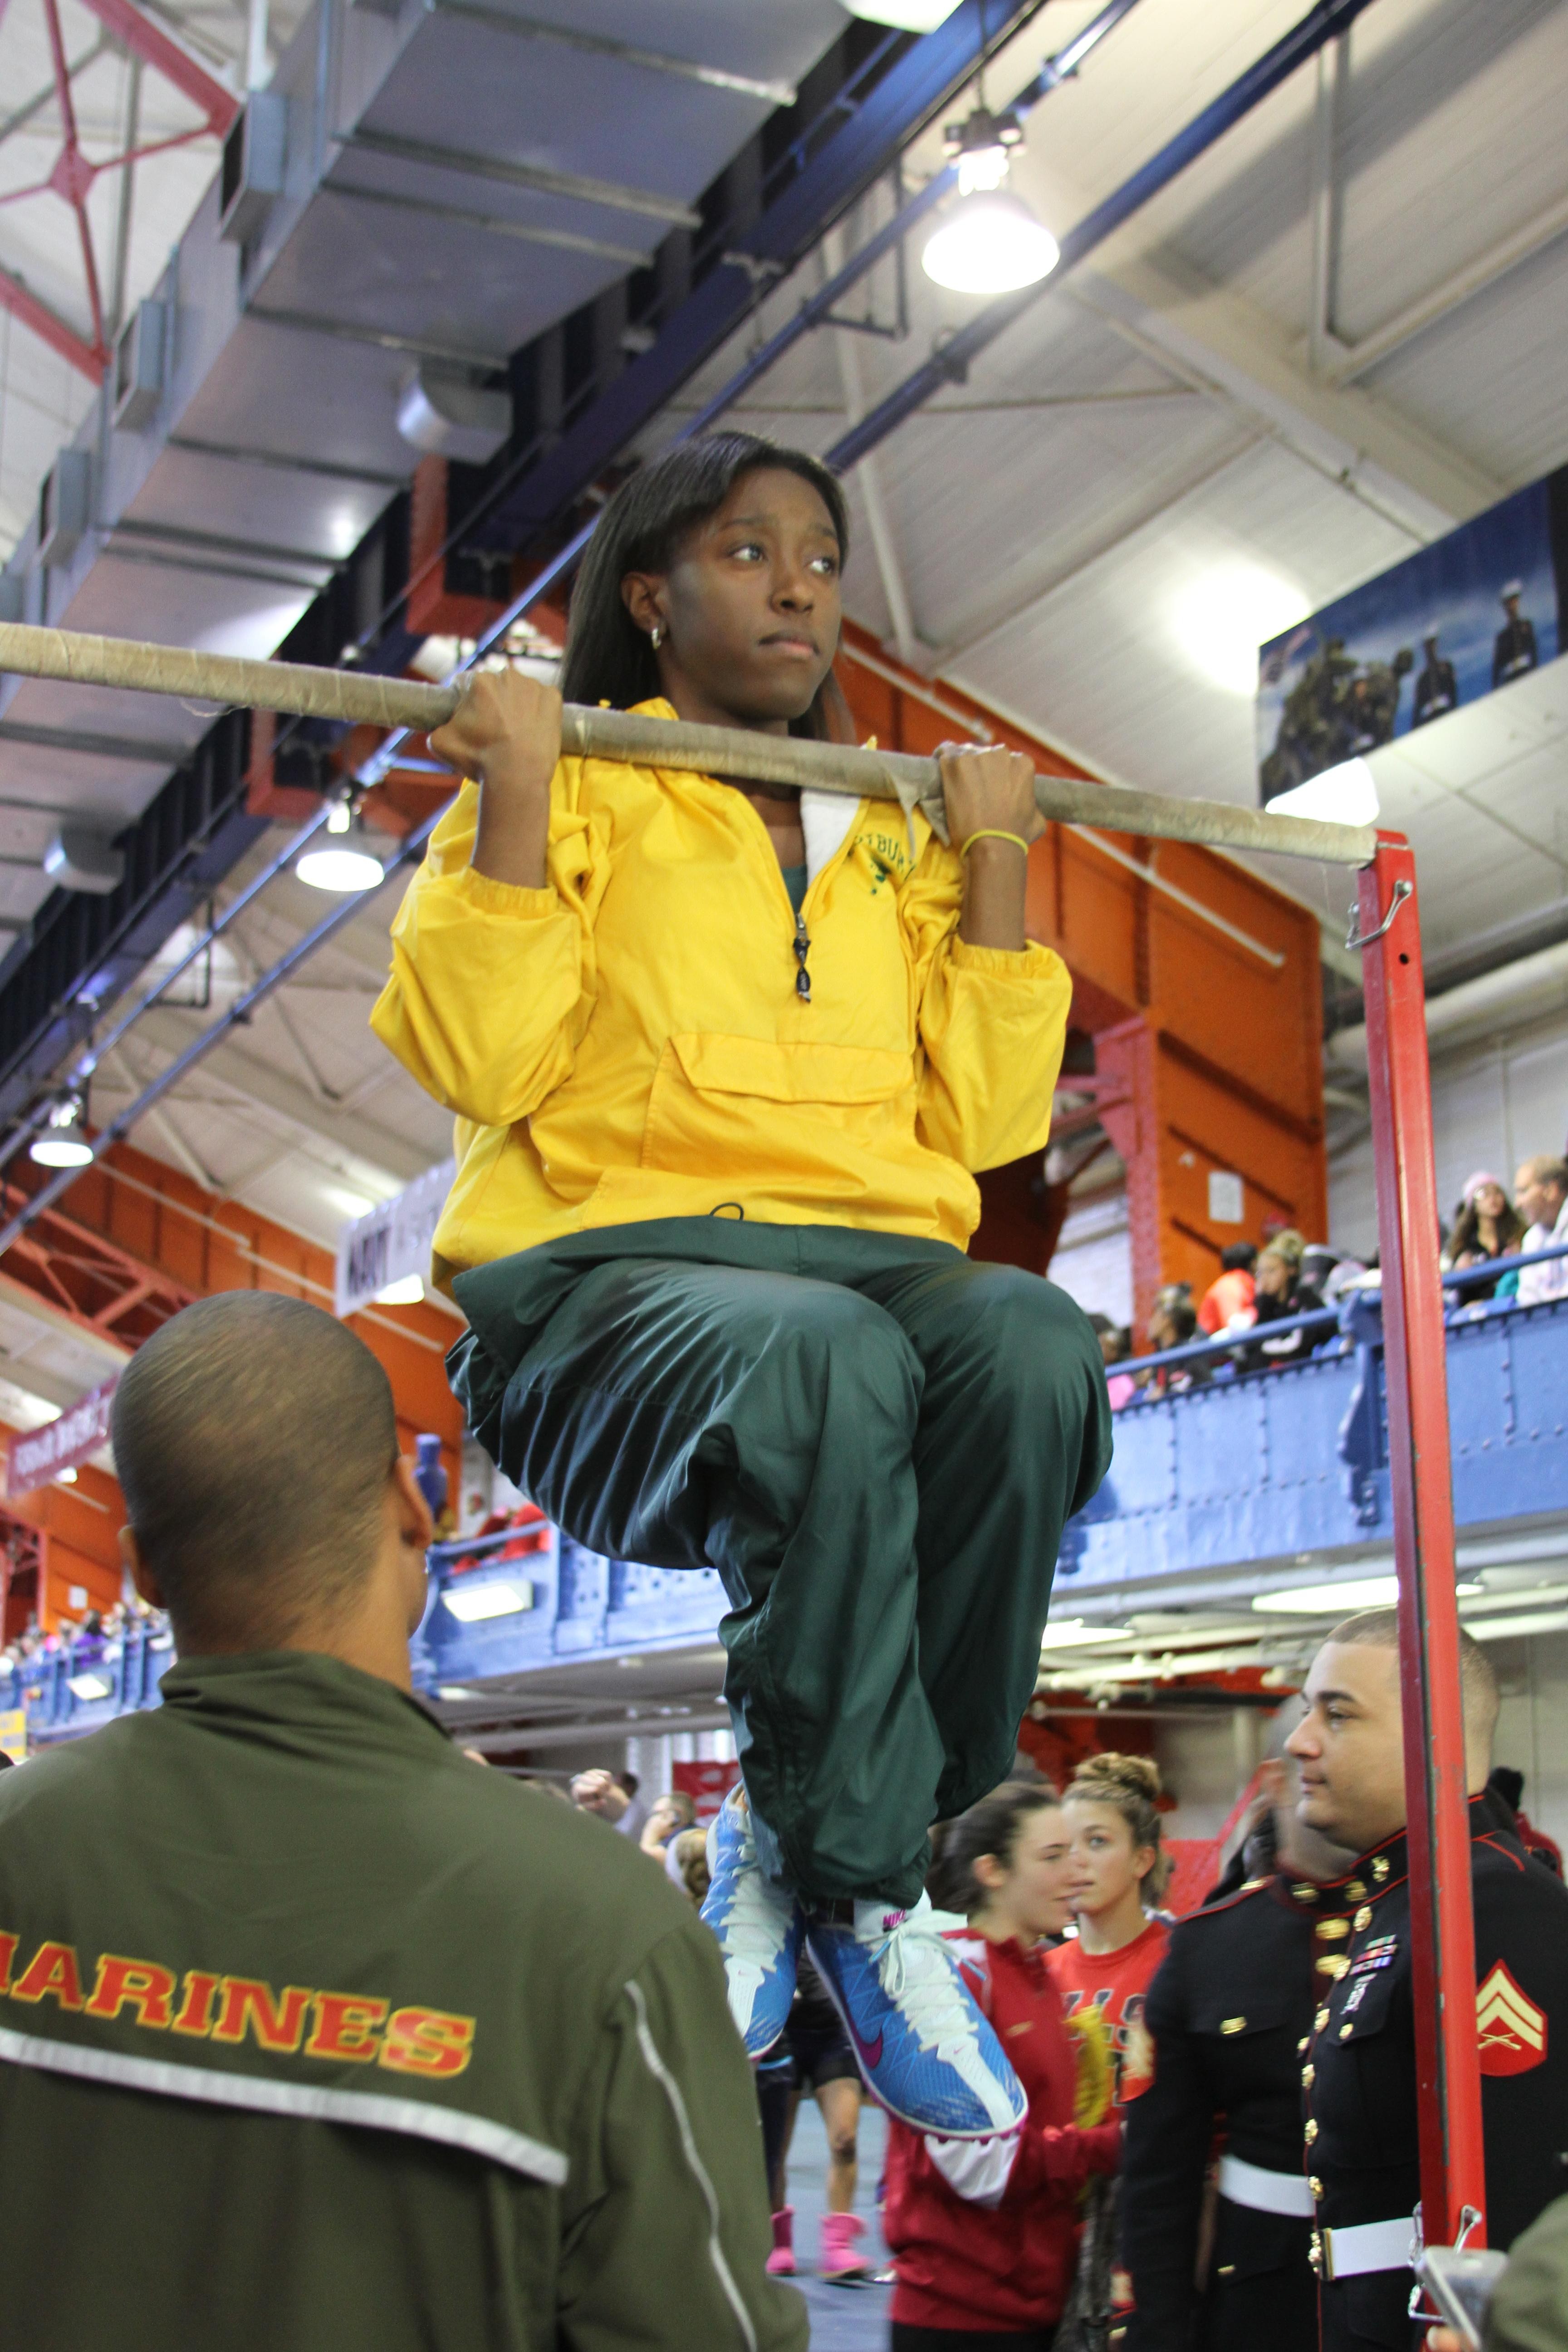 Armory hosts annual Marine Corps Holiday Classic track meet > 1st